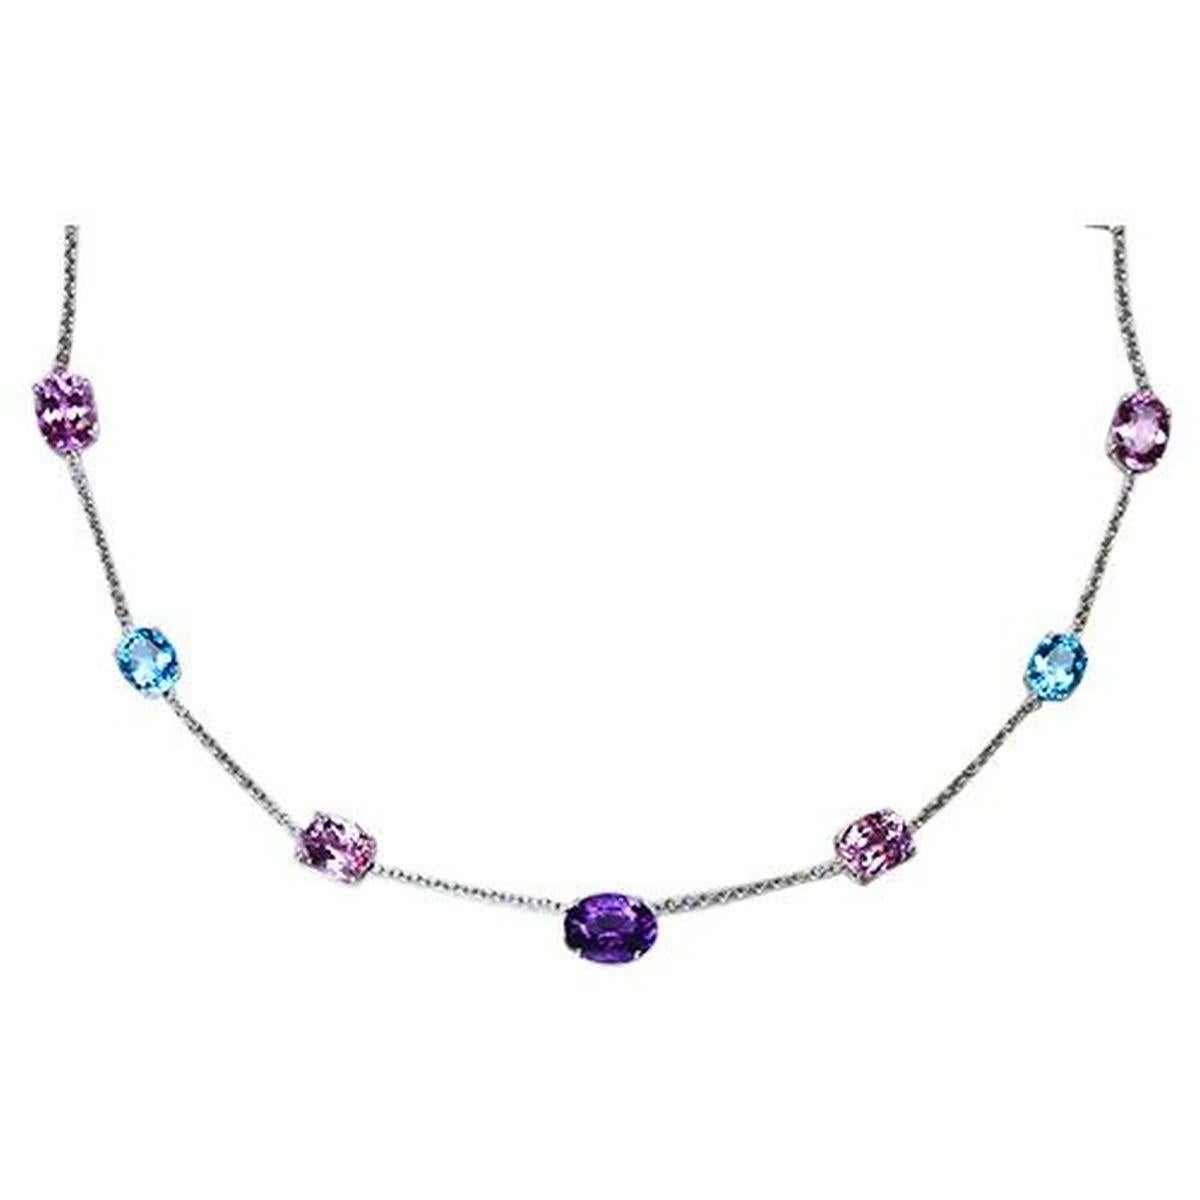 Simply Beautiful! Elegant and finely detailed Vintage Oscar Worthy Multi Color Pink, Blue, Purple and Yellow Gemstone Gold Necklace. Hand set with Oval Cushion High-Quality IF Gemstones. Featuring Kunzite, Blue Topaz, Amethyst and Citrine. Weighing